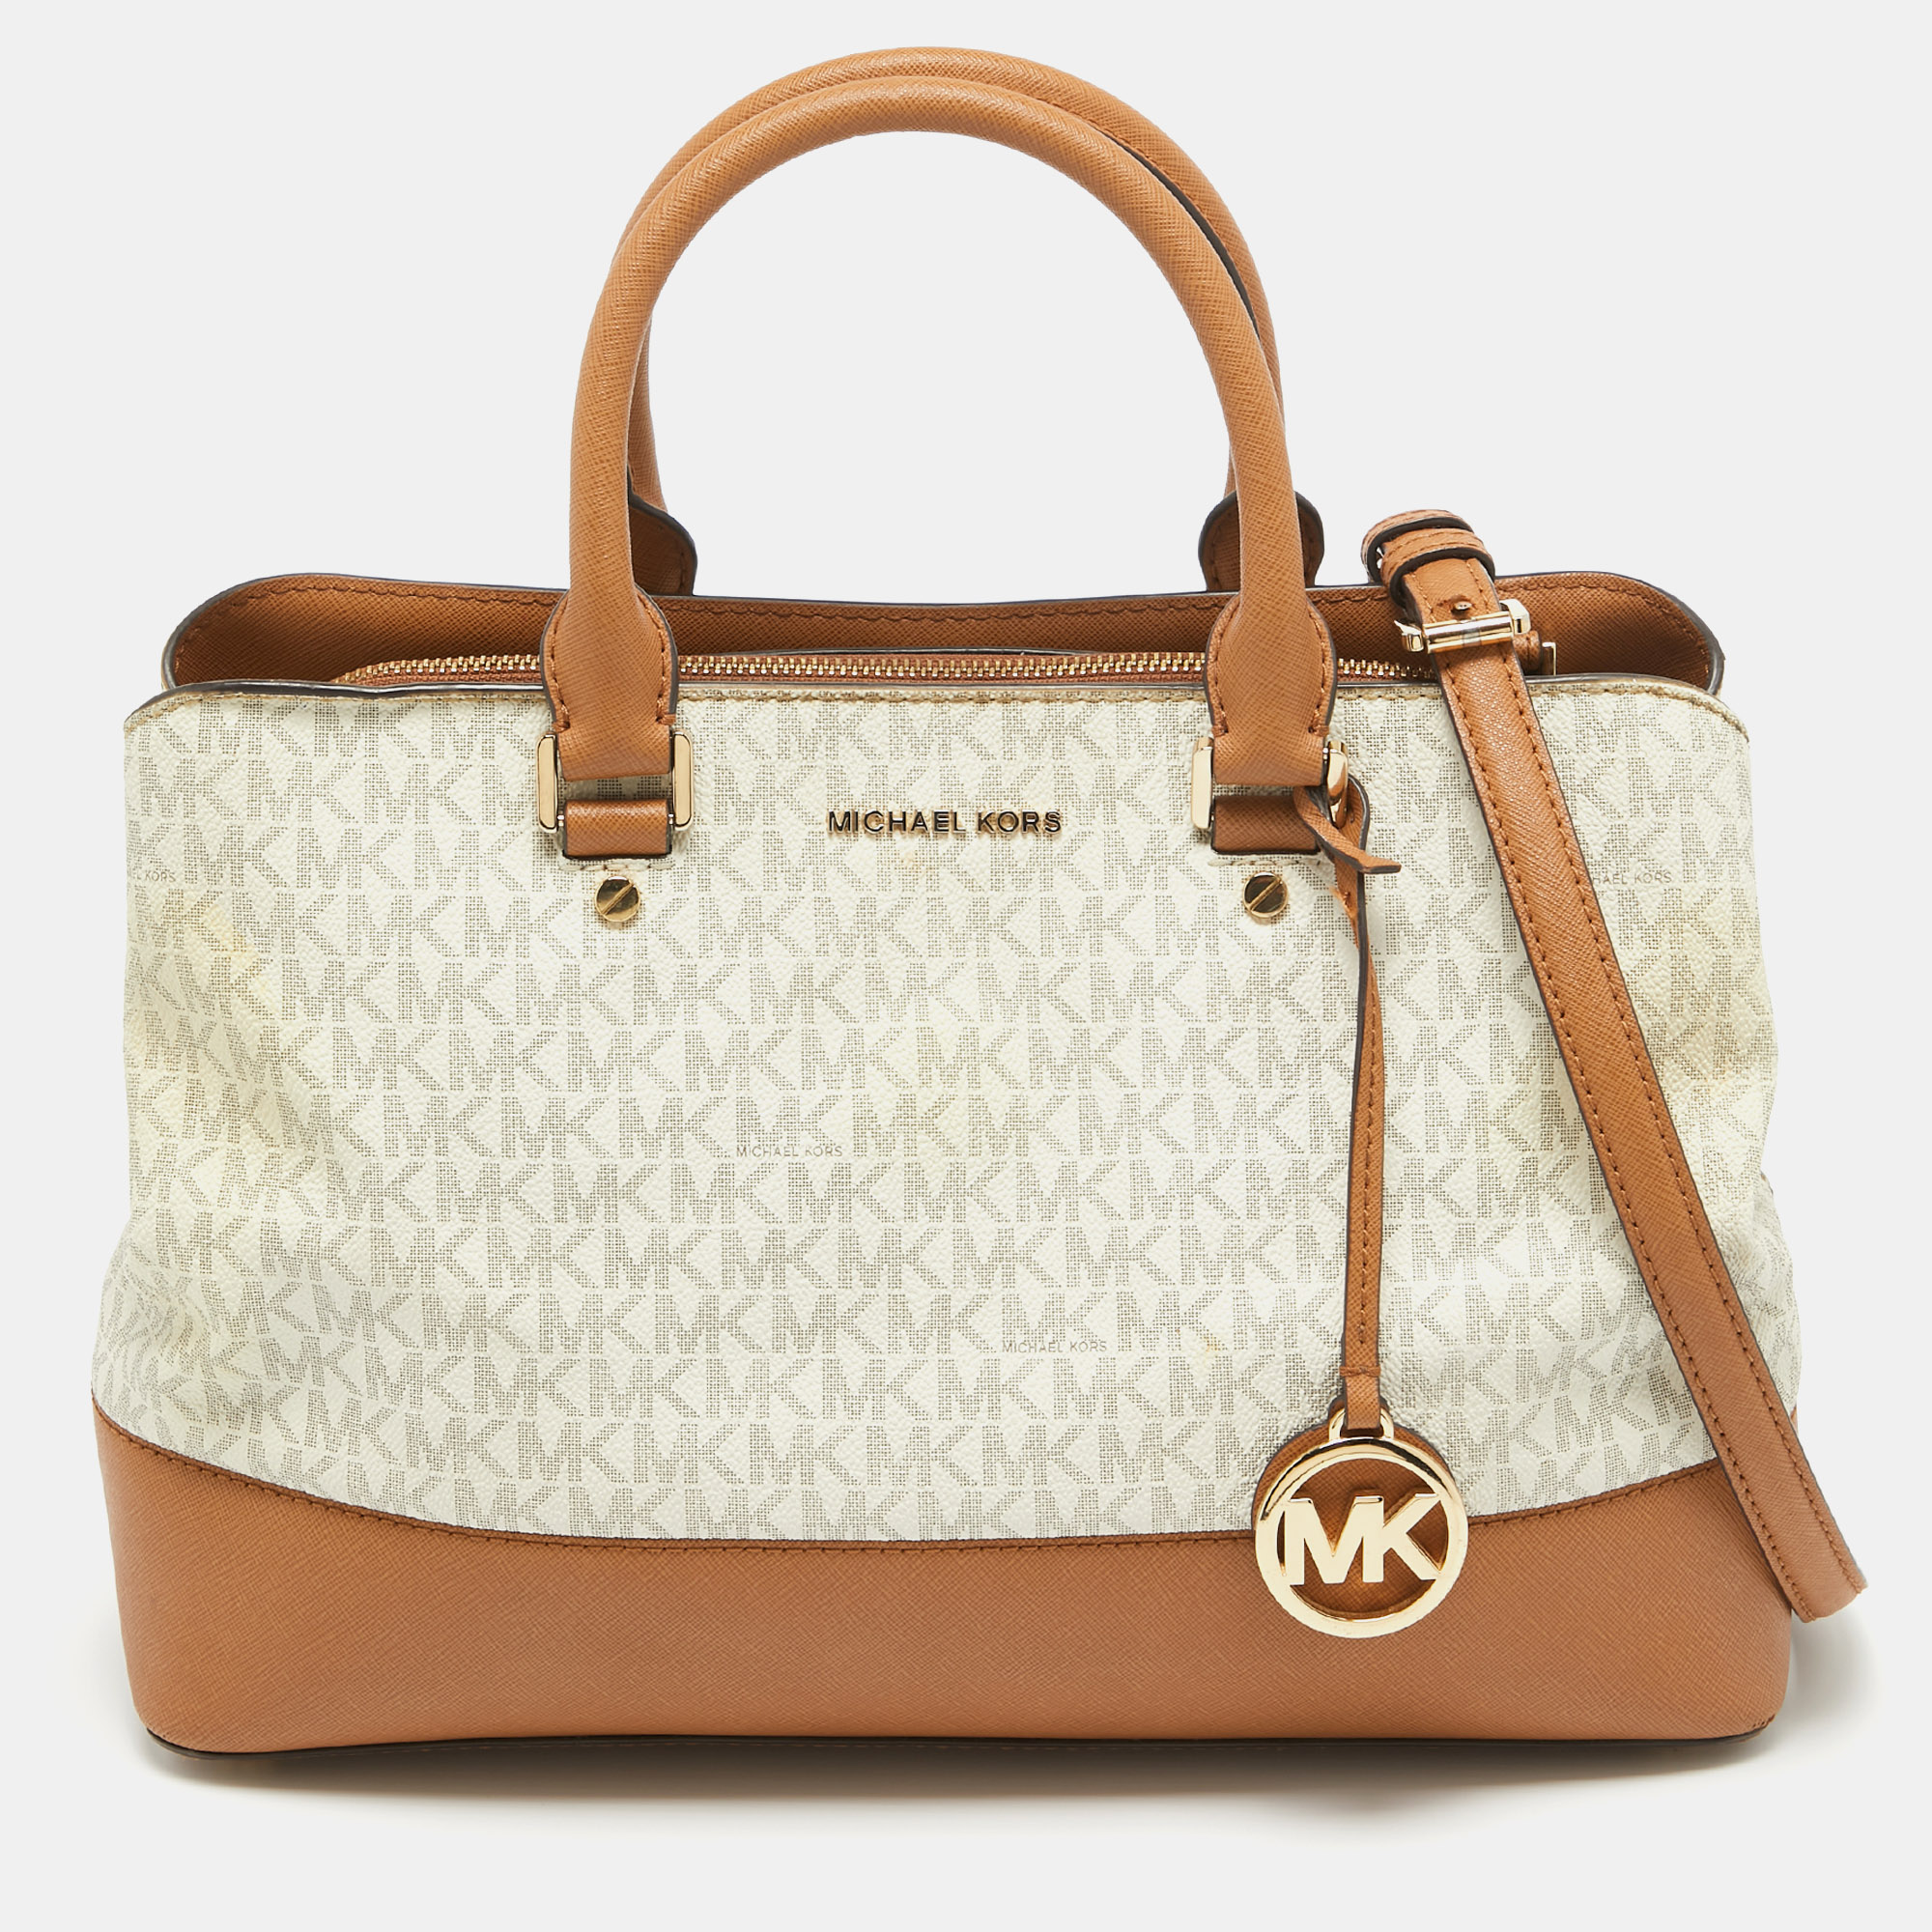 

Michael Kors Brown/White Signature Coated Canvas and Leather Savannah Satchel